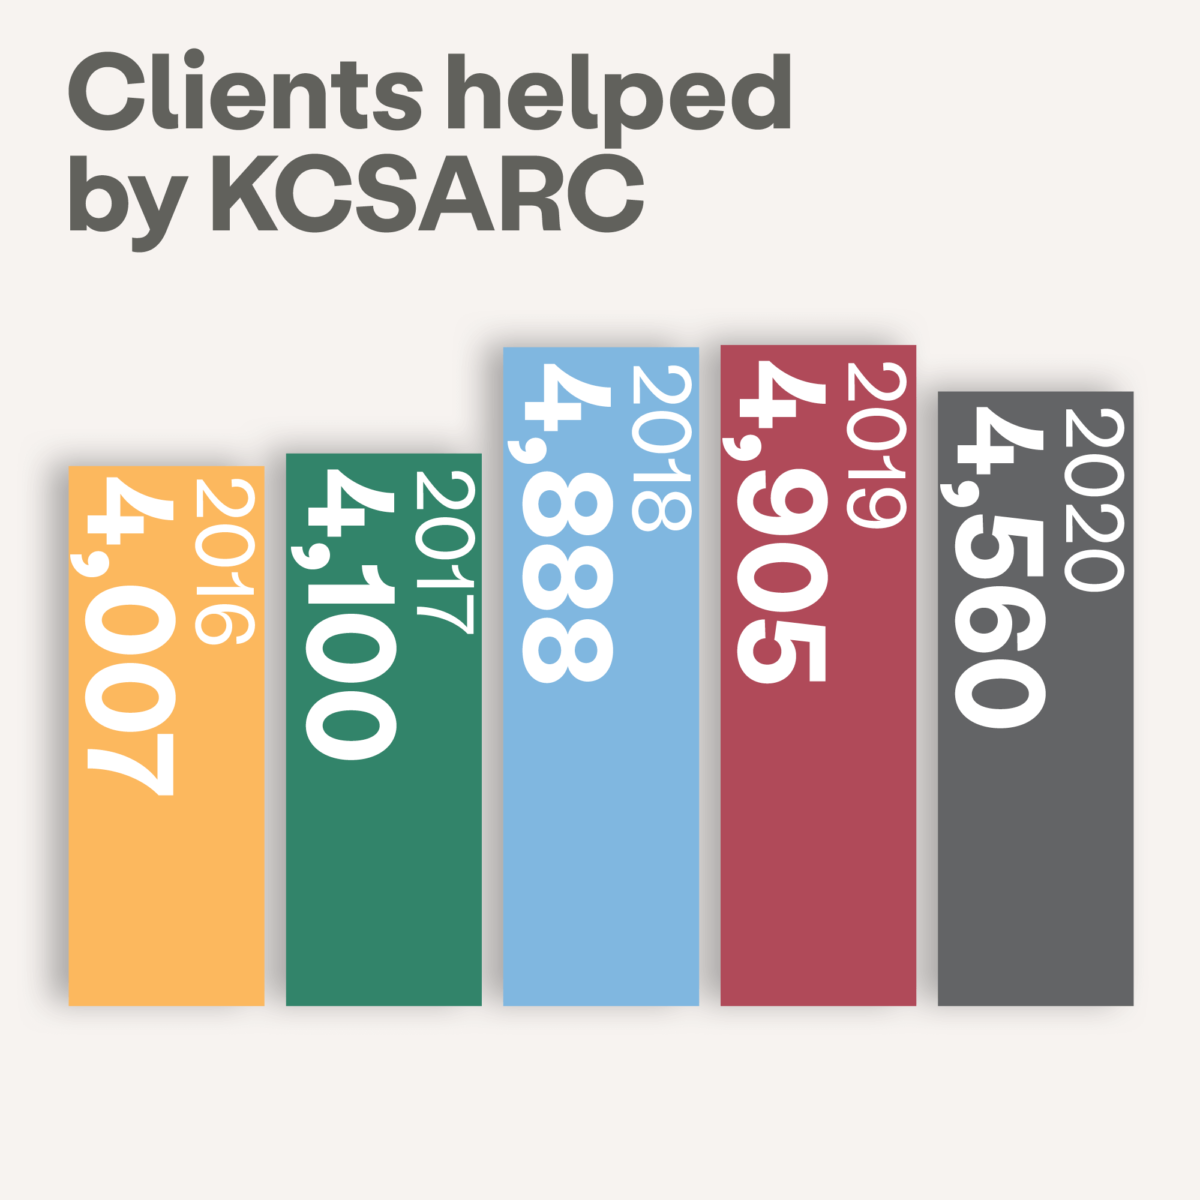 Client service numbers image